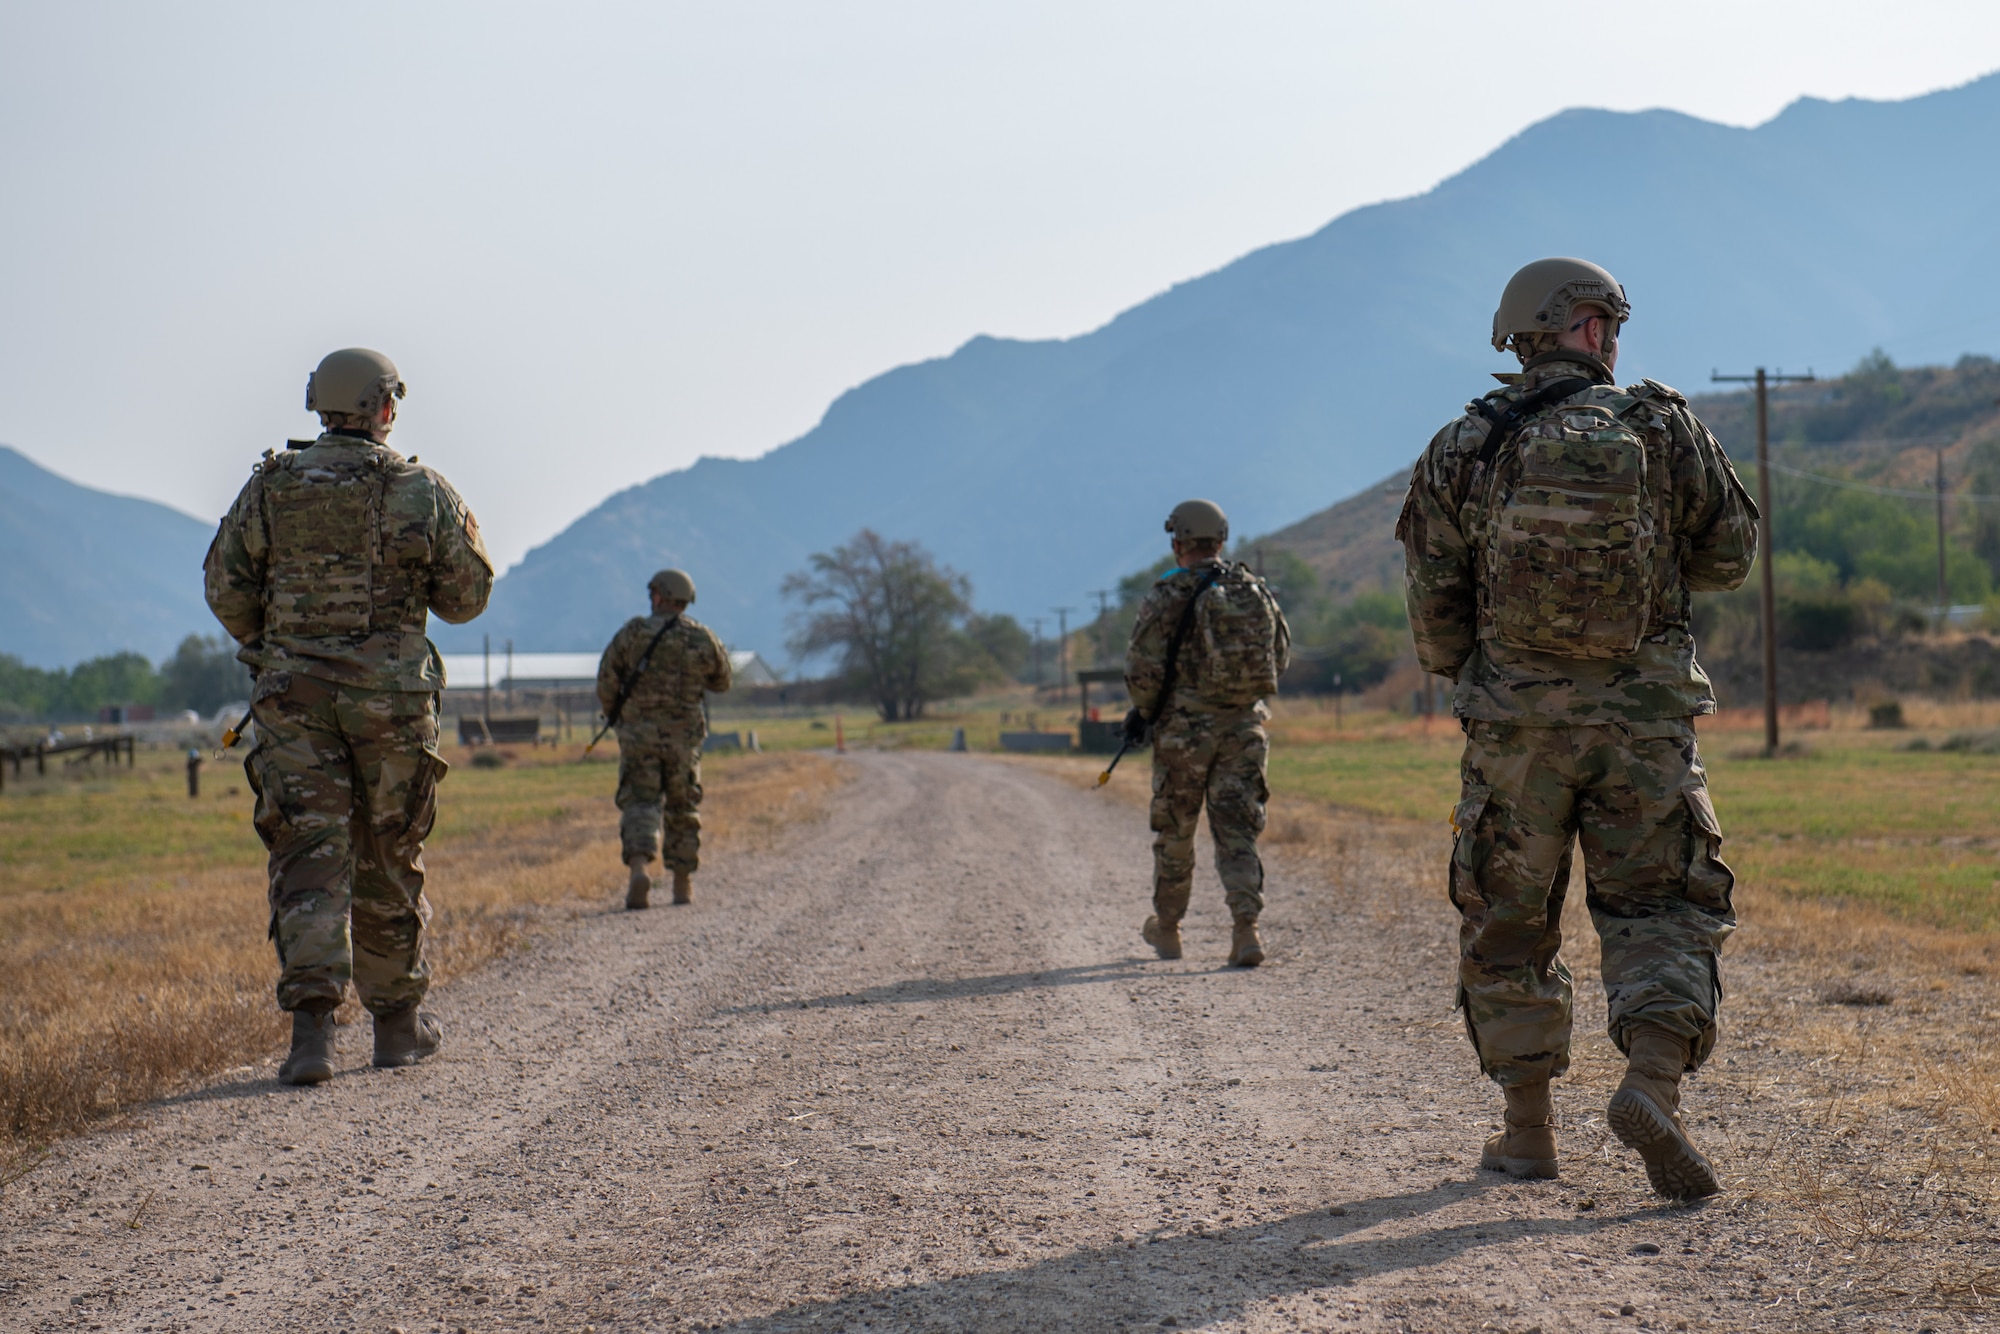 Reservists from the 419th Security Forces Squadron walks in formation during an exercise Sept. 13, 2020, at Hill Air Force Base, Utah.